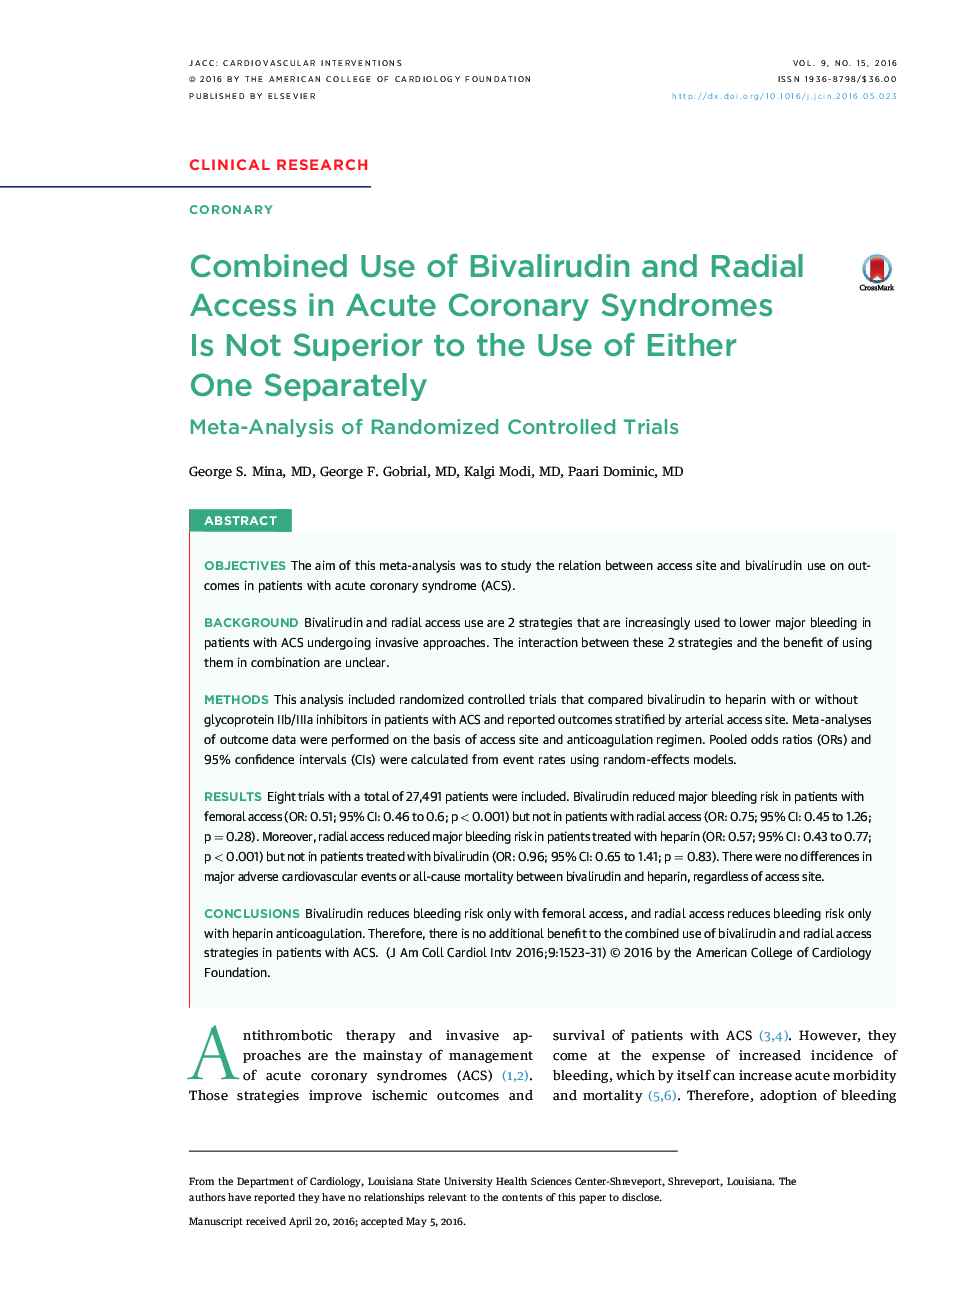 Combined Use of Bivalirudin and Radial Access in Acute Coronary Syndromes Is Not Superior to the Use of Either One Separately : Meta-Analysis of Randomized Controlled Trials